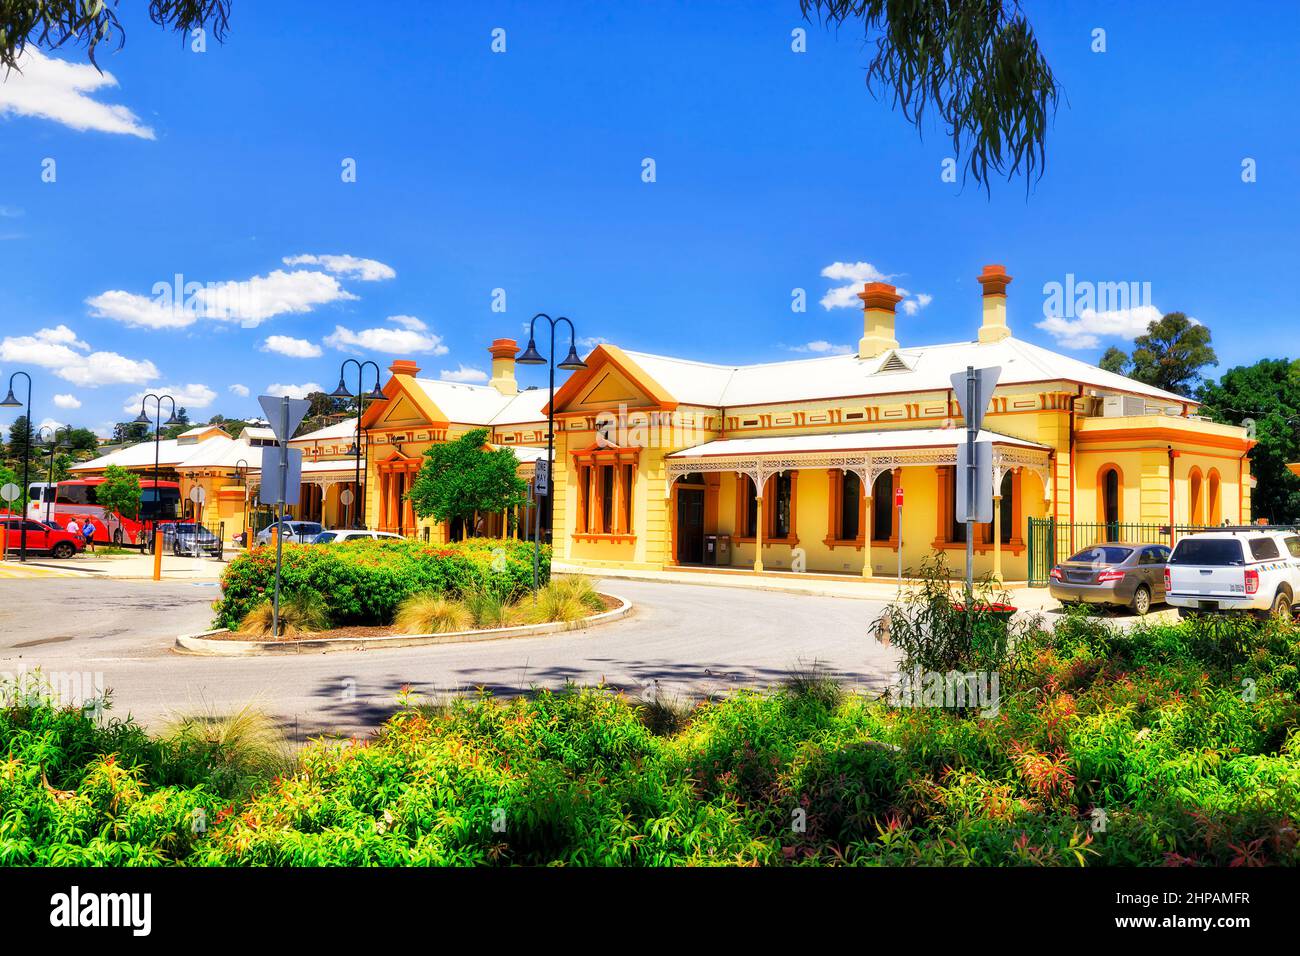 Entrance to Wagga Wagga city train station from taxi rank and town square - Australian regional settlement. Stock Photo